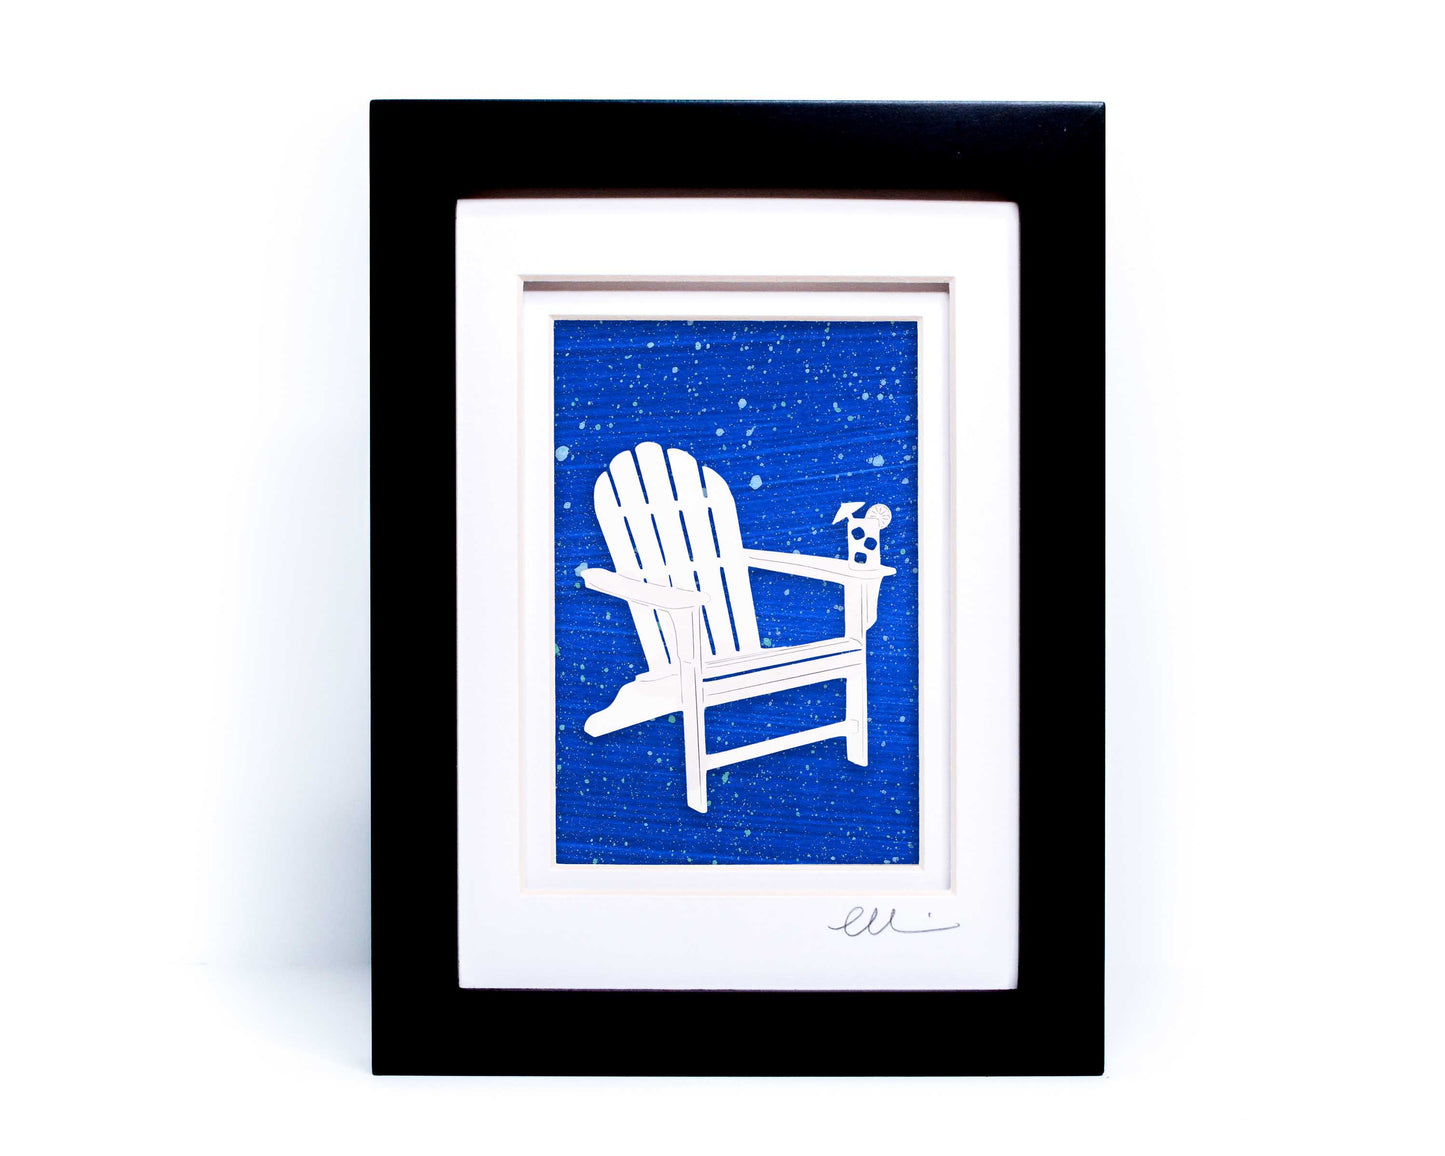 White beach adirondack chair with drink on chair arm papercut on hand painted bright blue splattered background. 